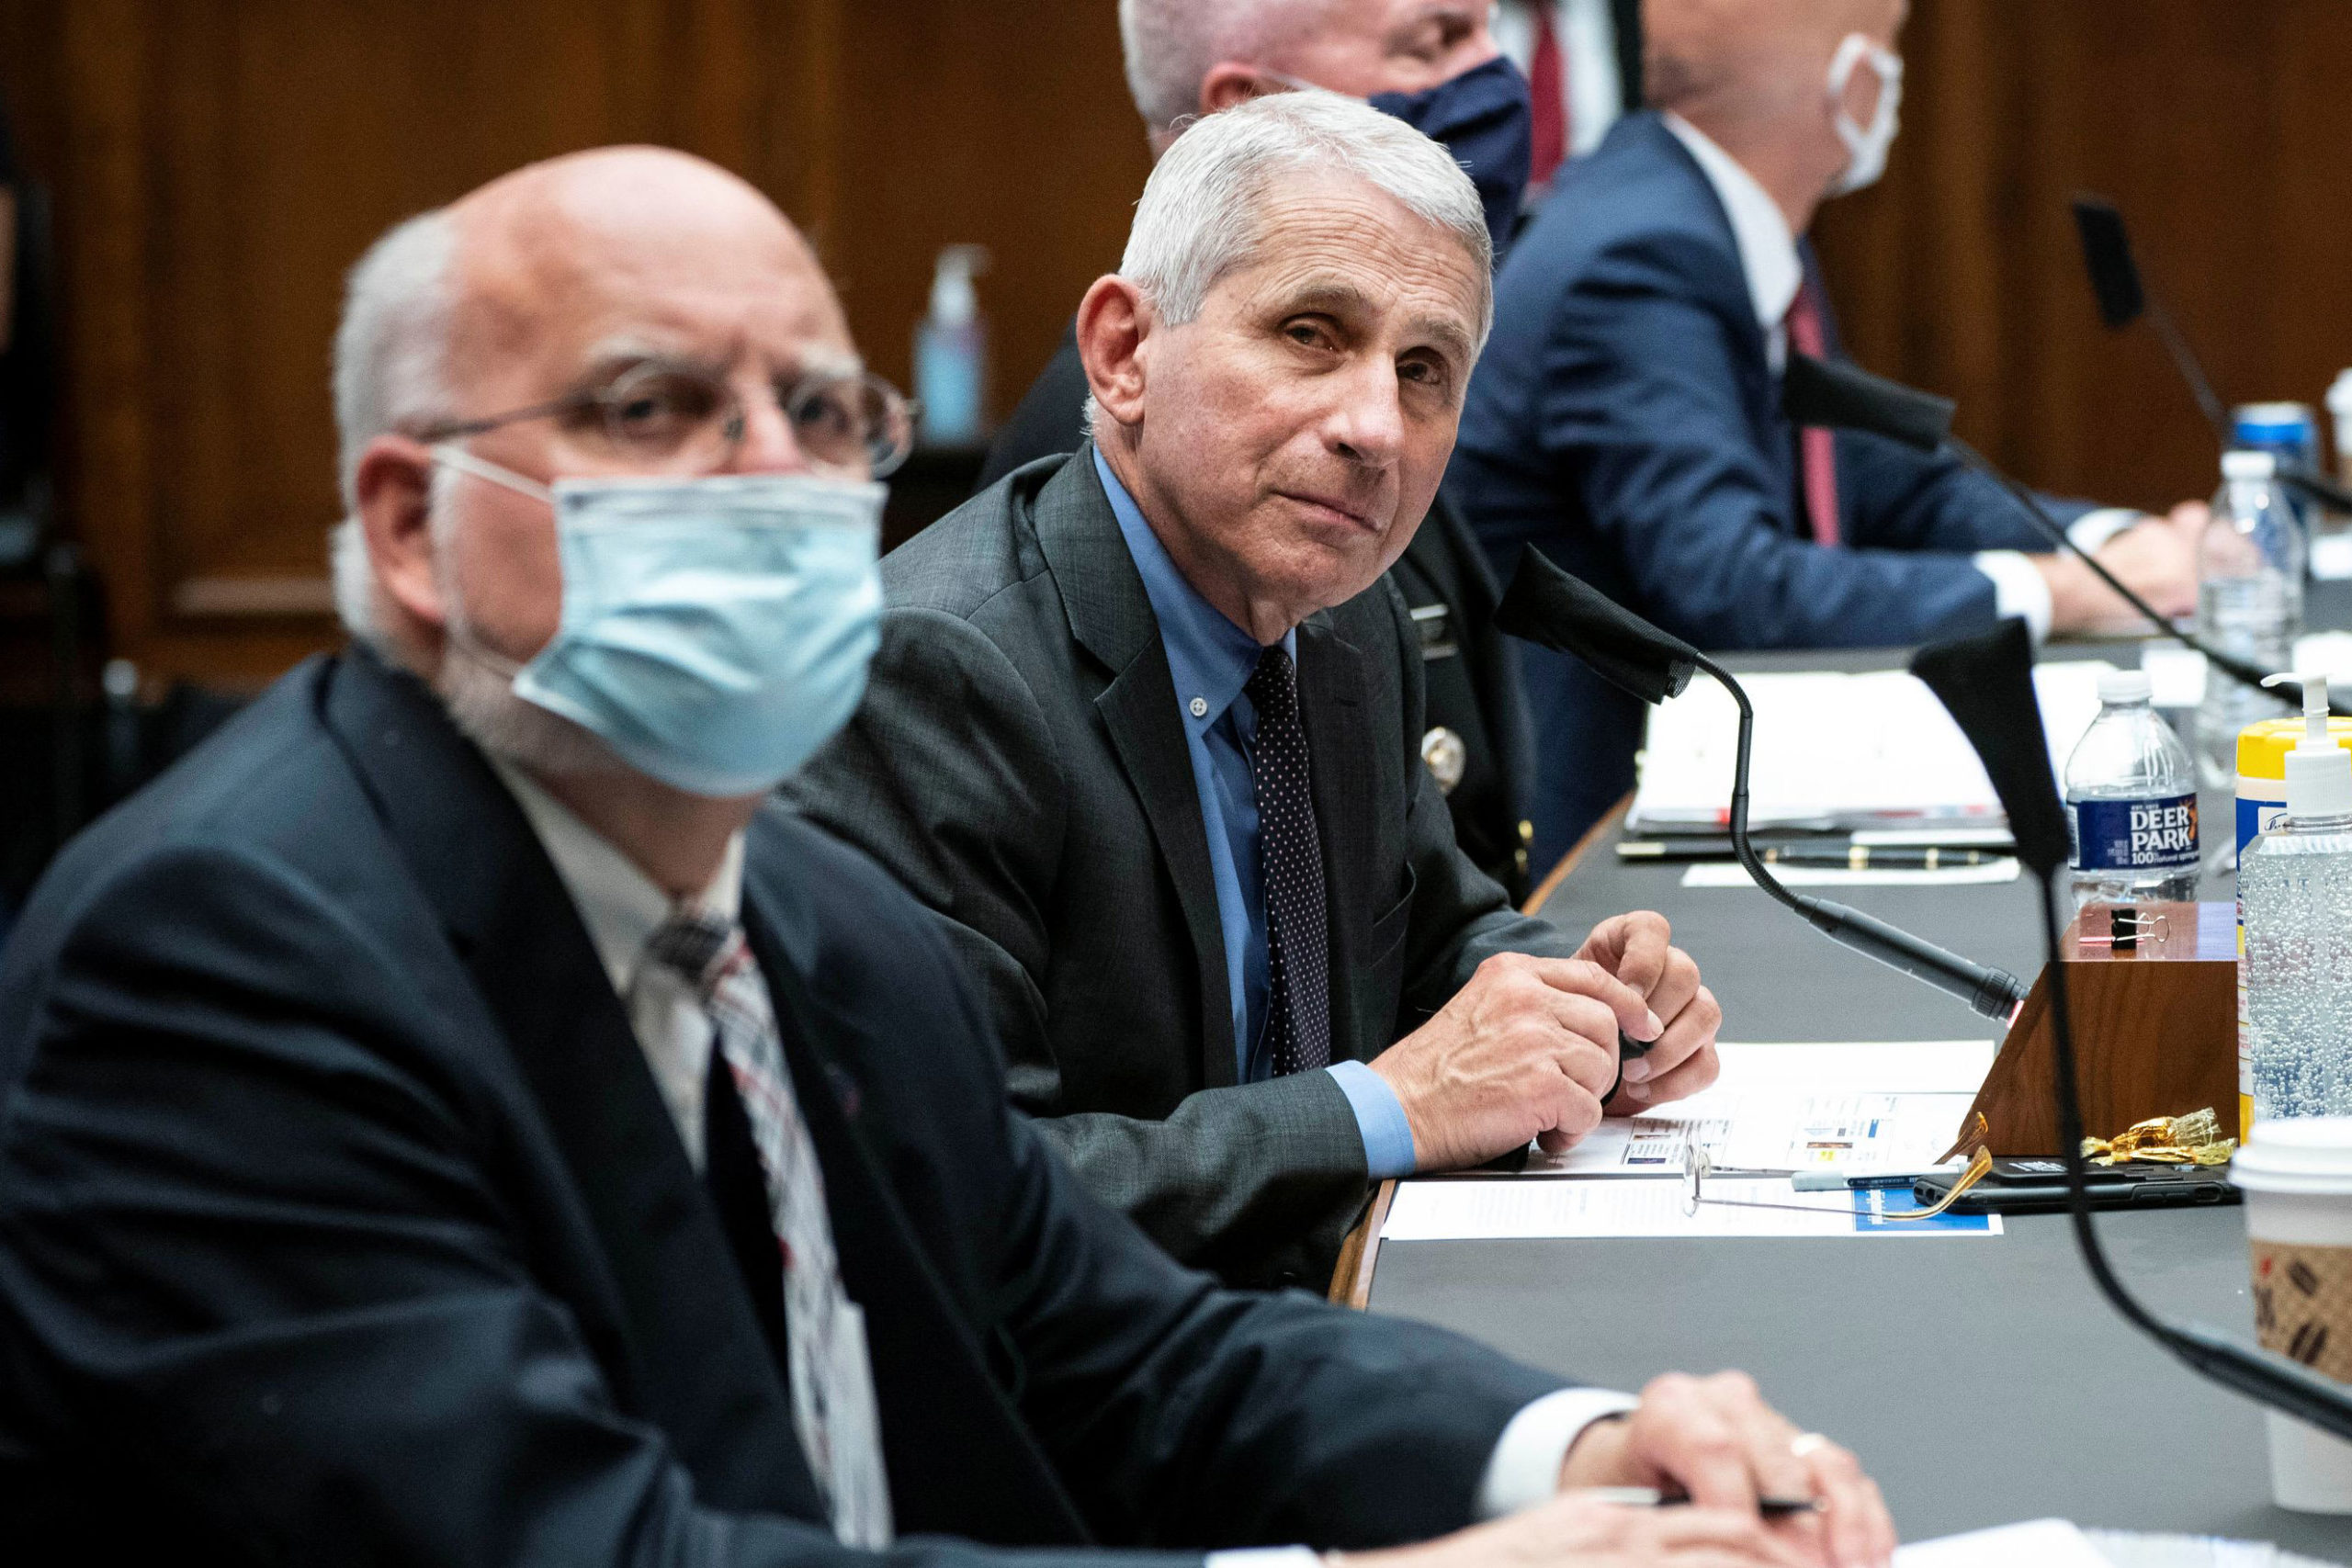 Fauci says components of U.S. are seeing a ‘distrubing surge’ of coronavirus